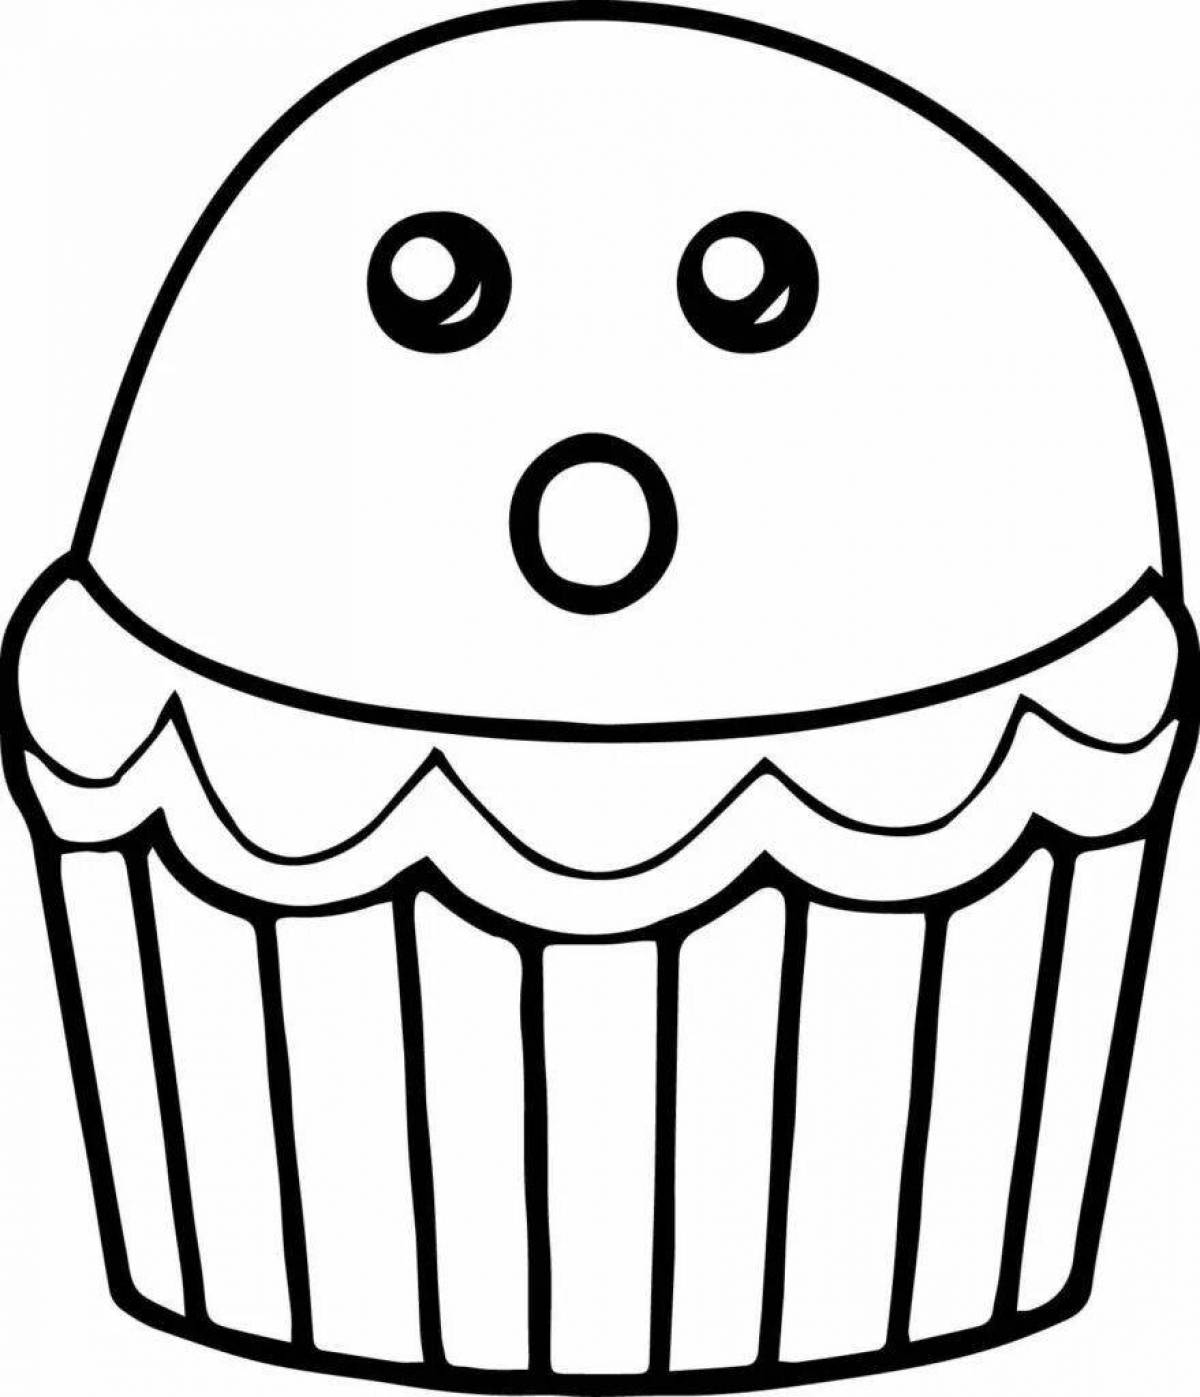 Playful cupcake coloring page for kids